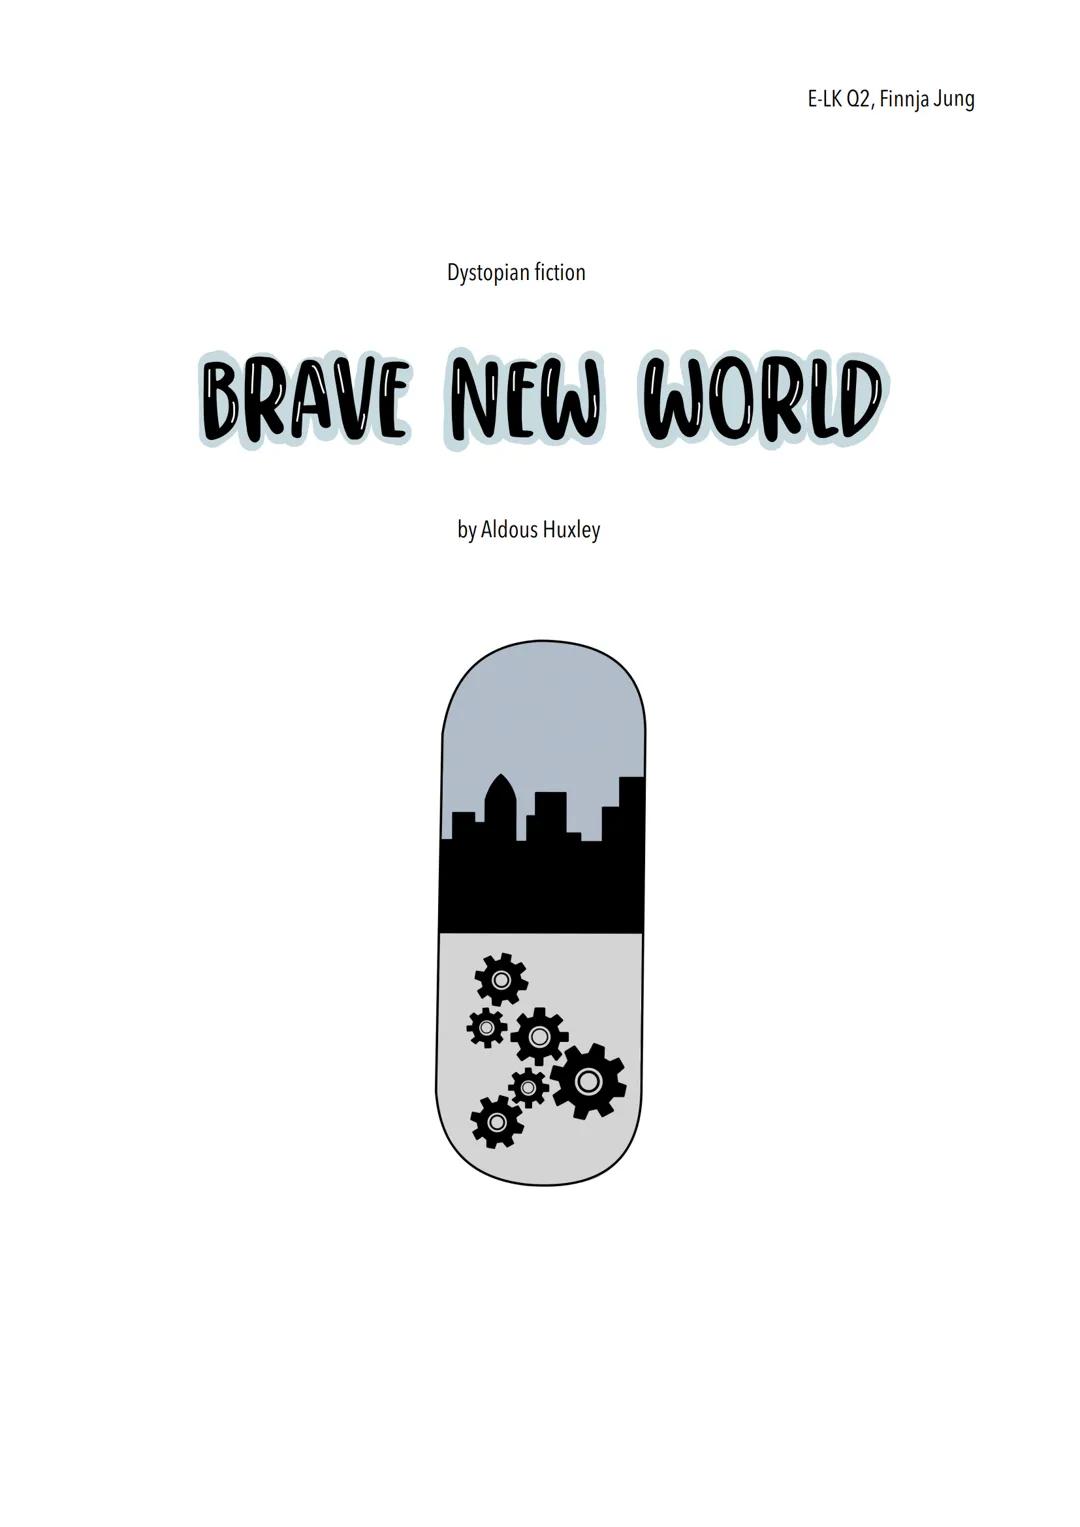 Dystopian fiction
E-LK Q2, Finnja Jung
BRAVE NEW WORLD
by Aldous Huxley 1. GENERAL FACTS
2. REVIEW
HANDOUT BRAVE NEW WORLD
BRAVE
E-LK Q2, Fi